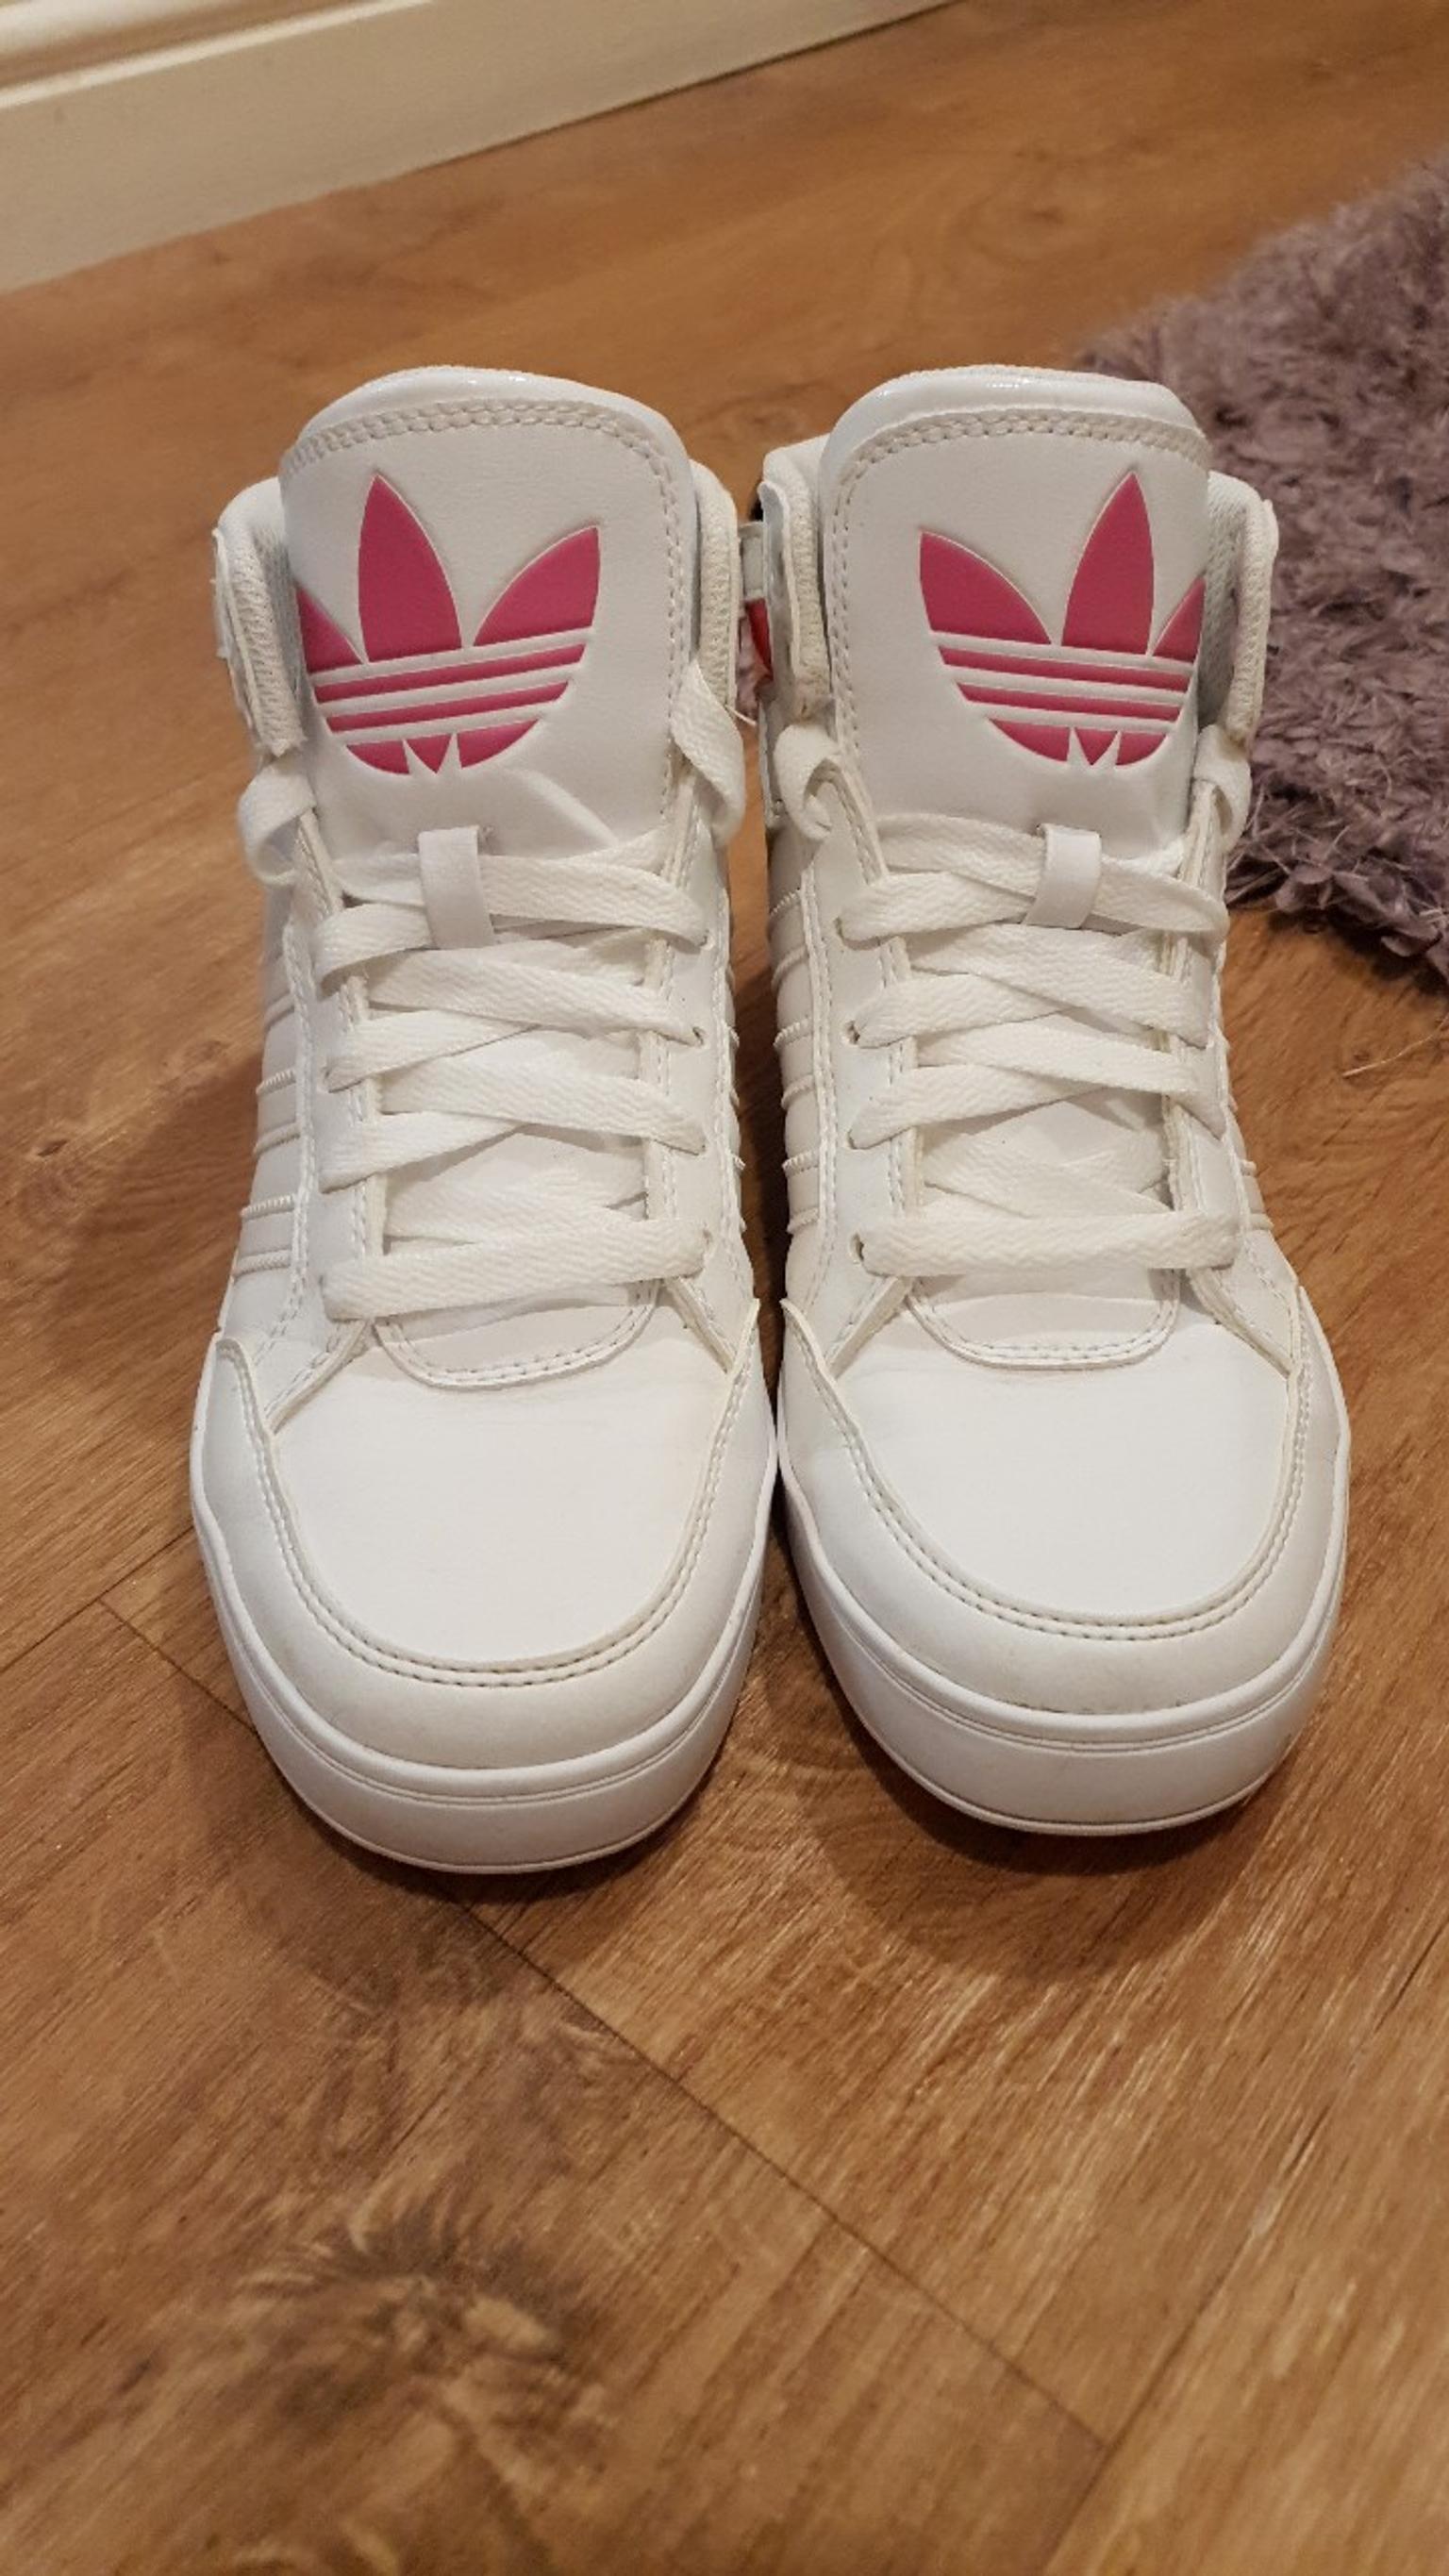 adidas high tops black and pink